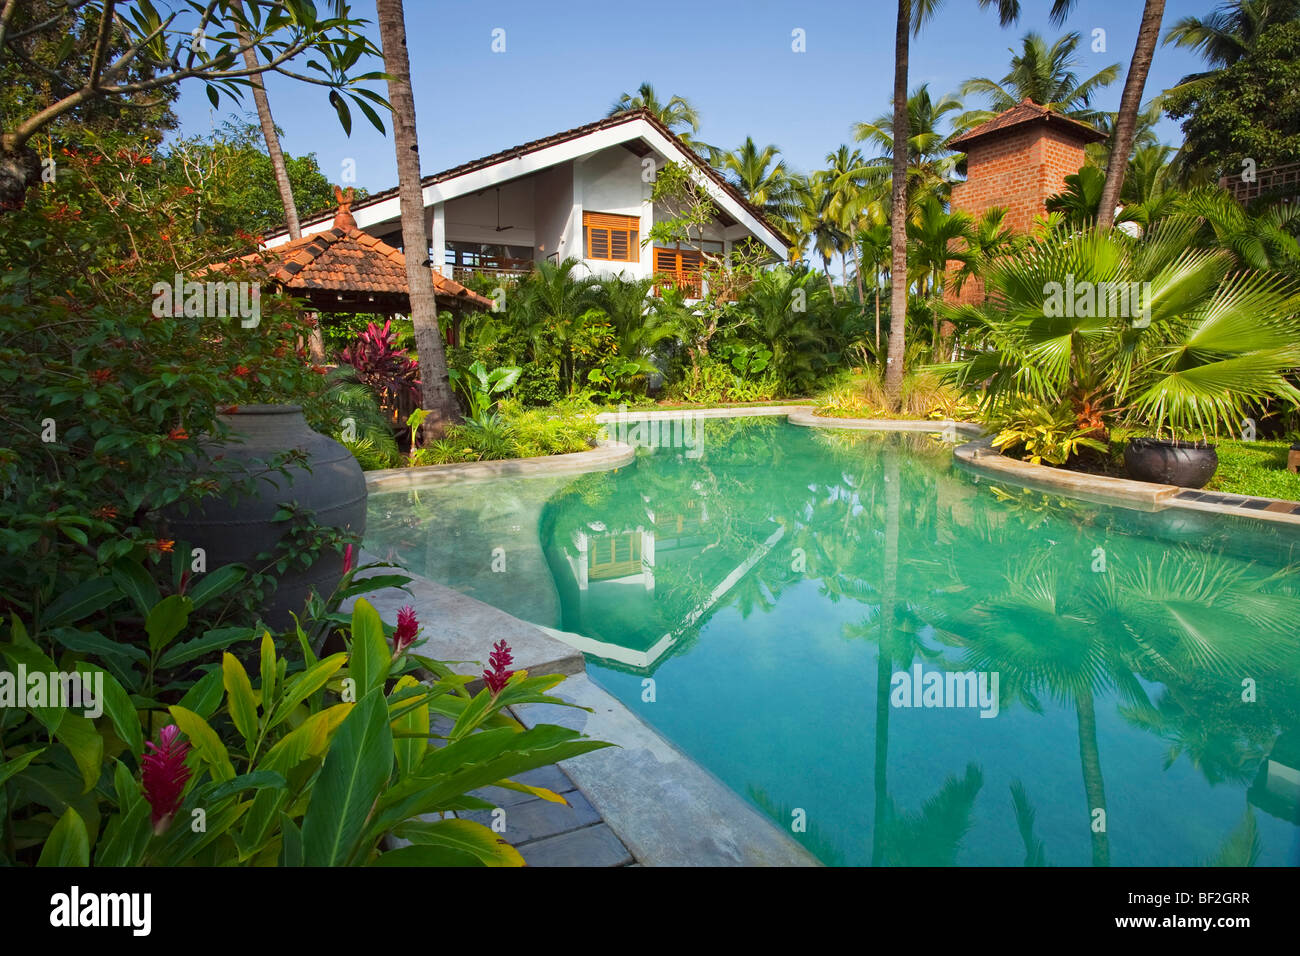 A luxury tropical modern villa with swimming pool surrounded by tropical gardens Stock Photo